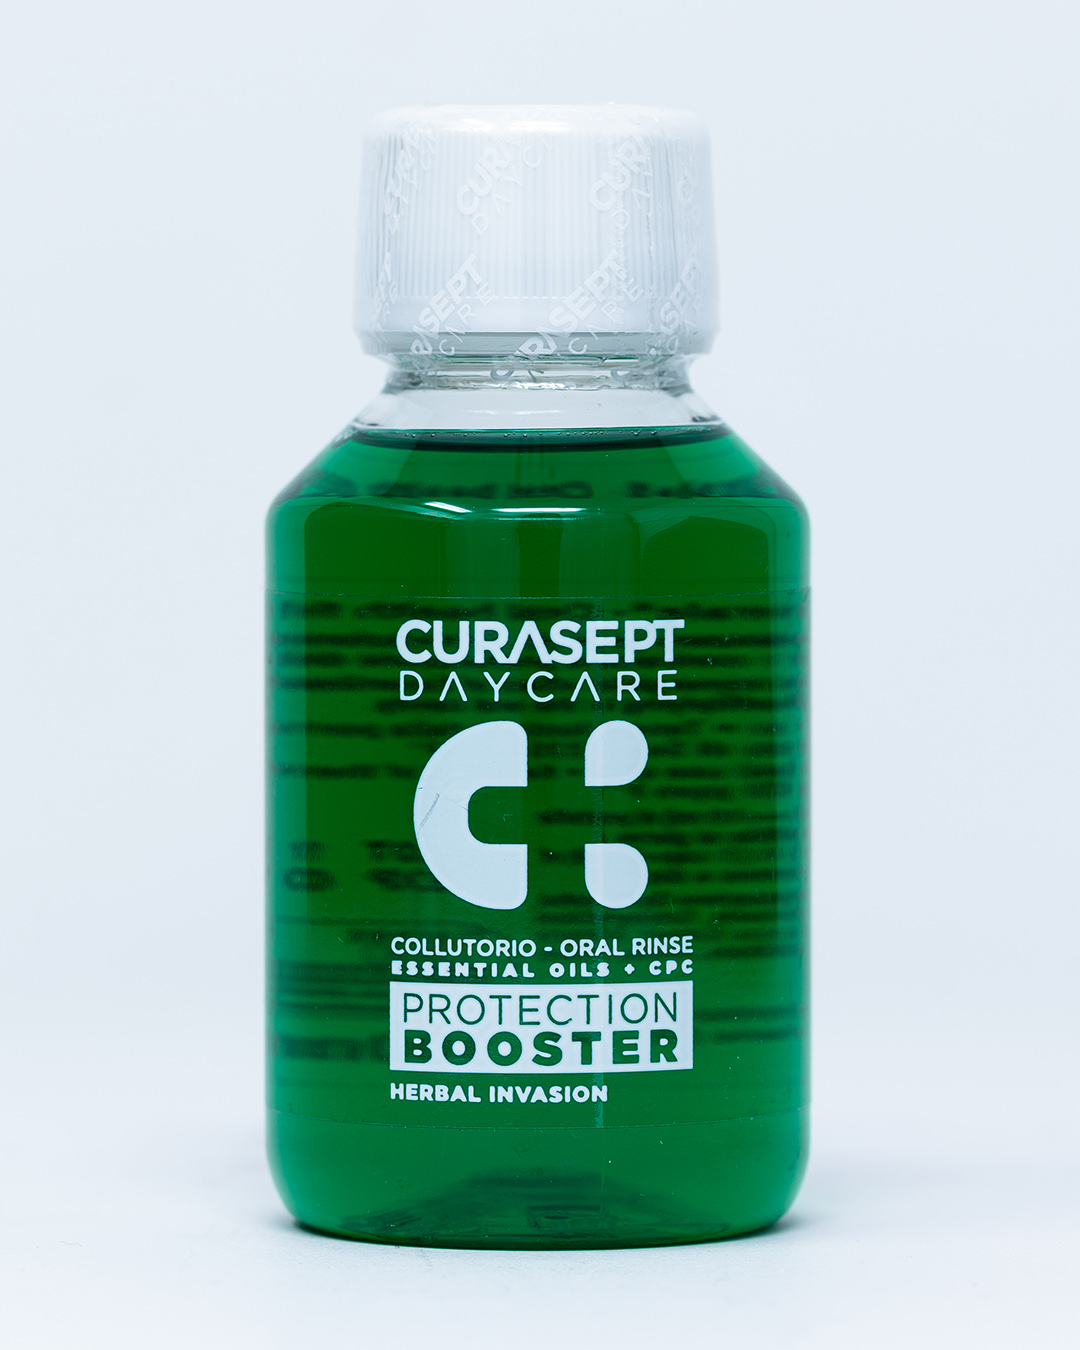 Curasept Collutorio Daycare Protection Booster Herbal Invasion - 100 ml